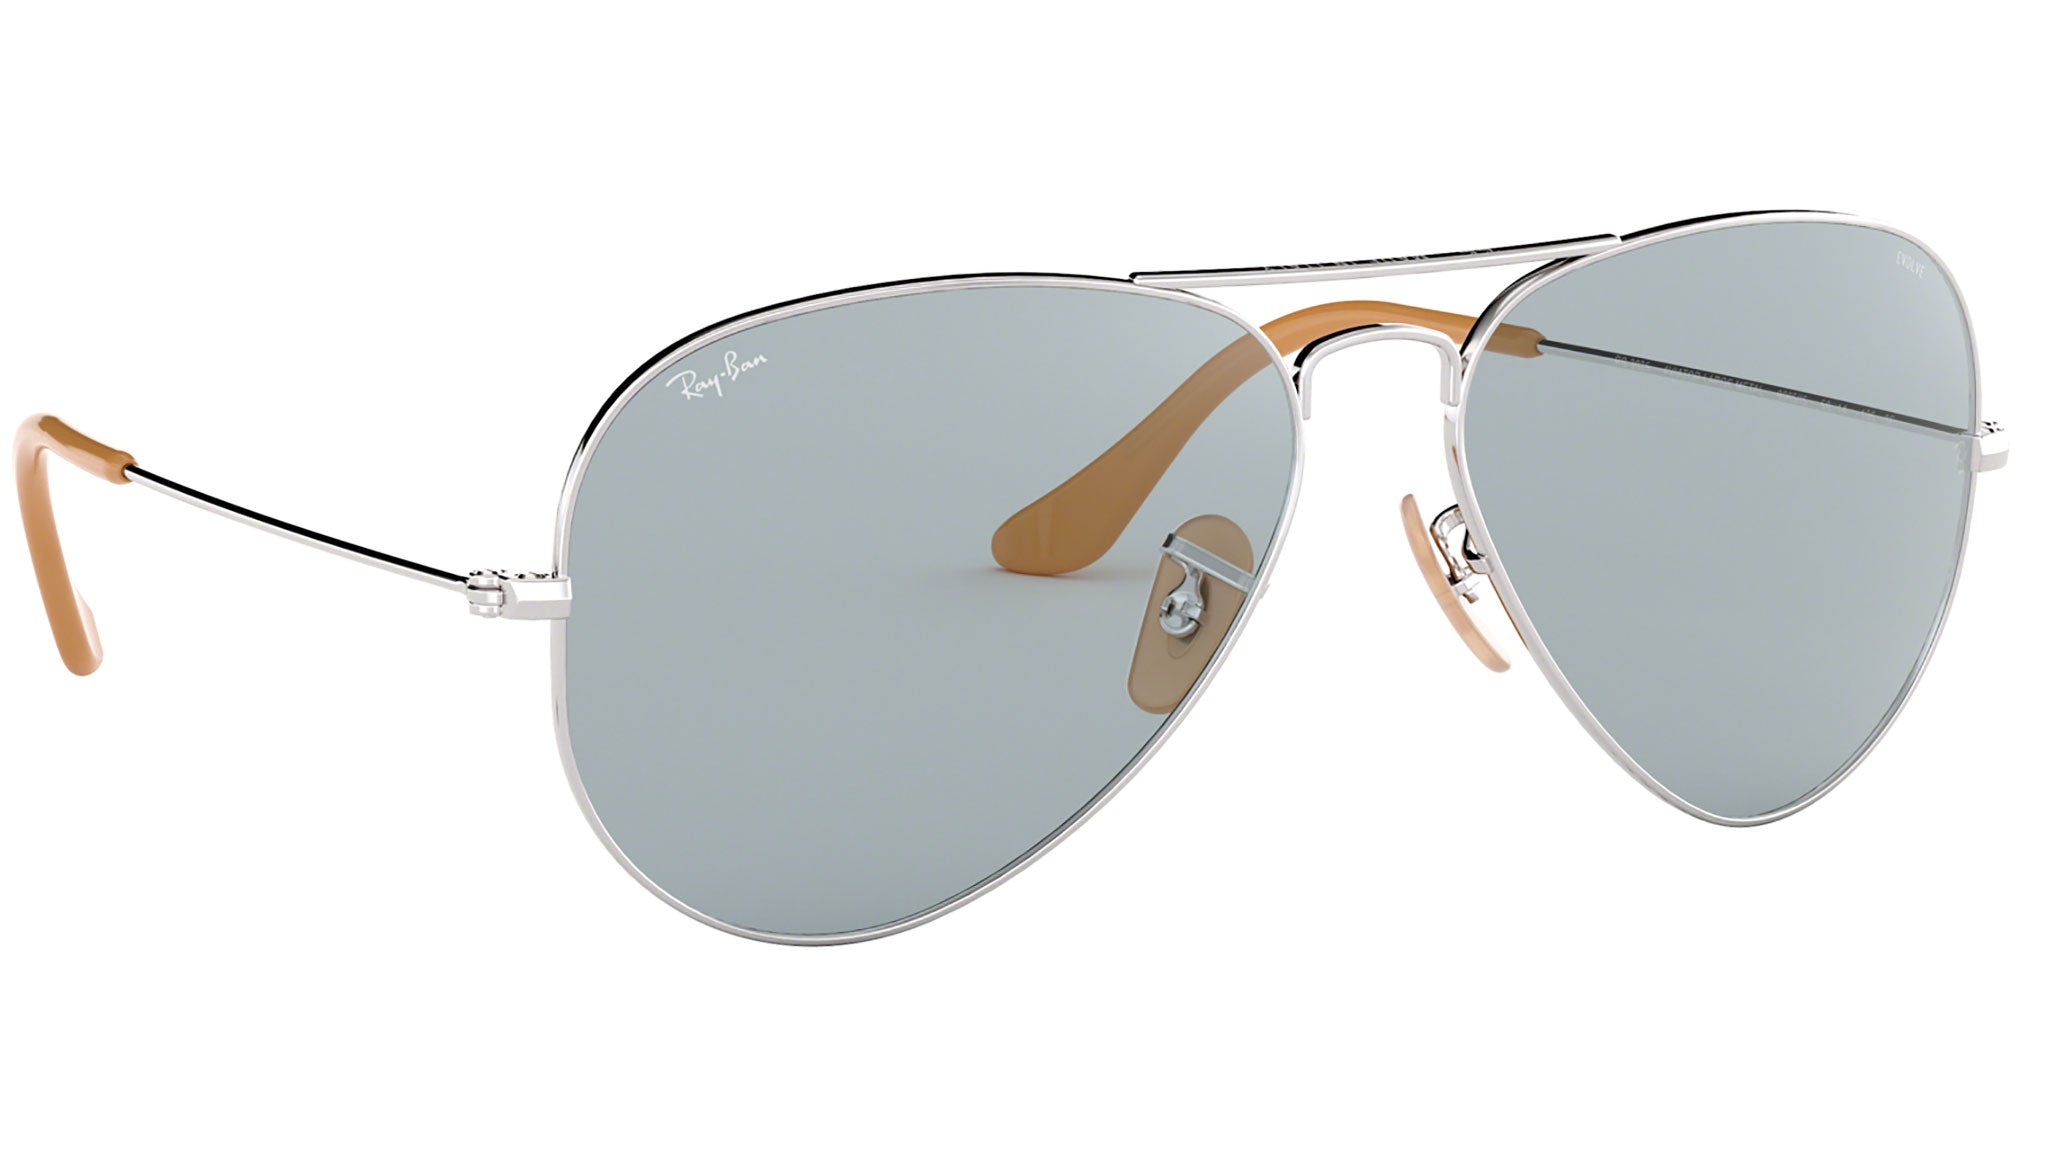 Aviator Washed Evolve RB3025 silver and blue